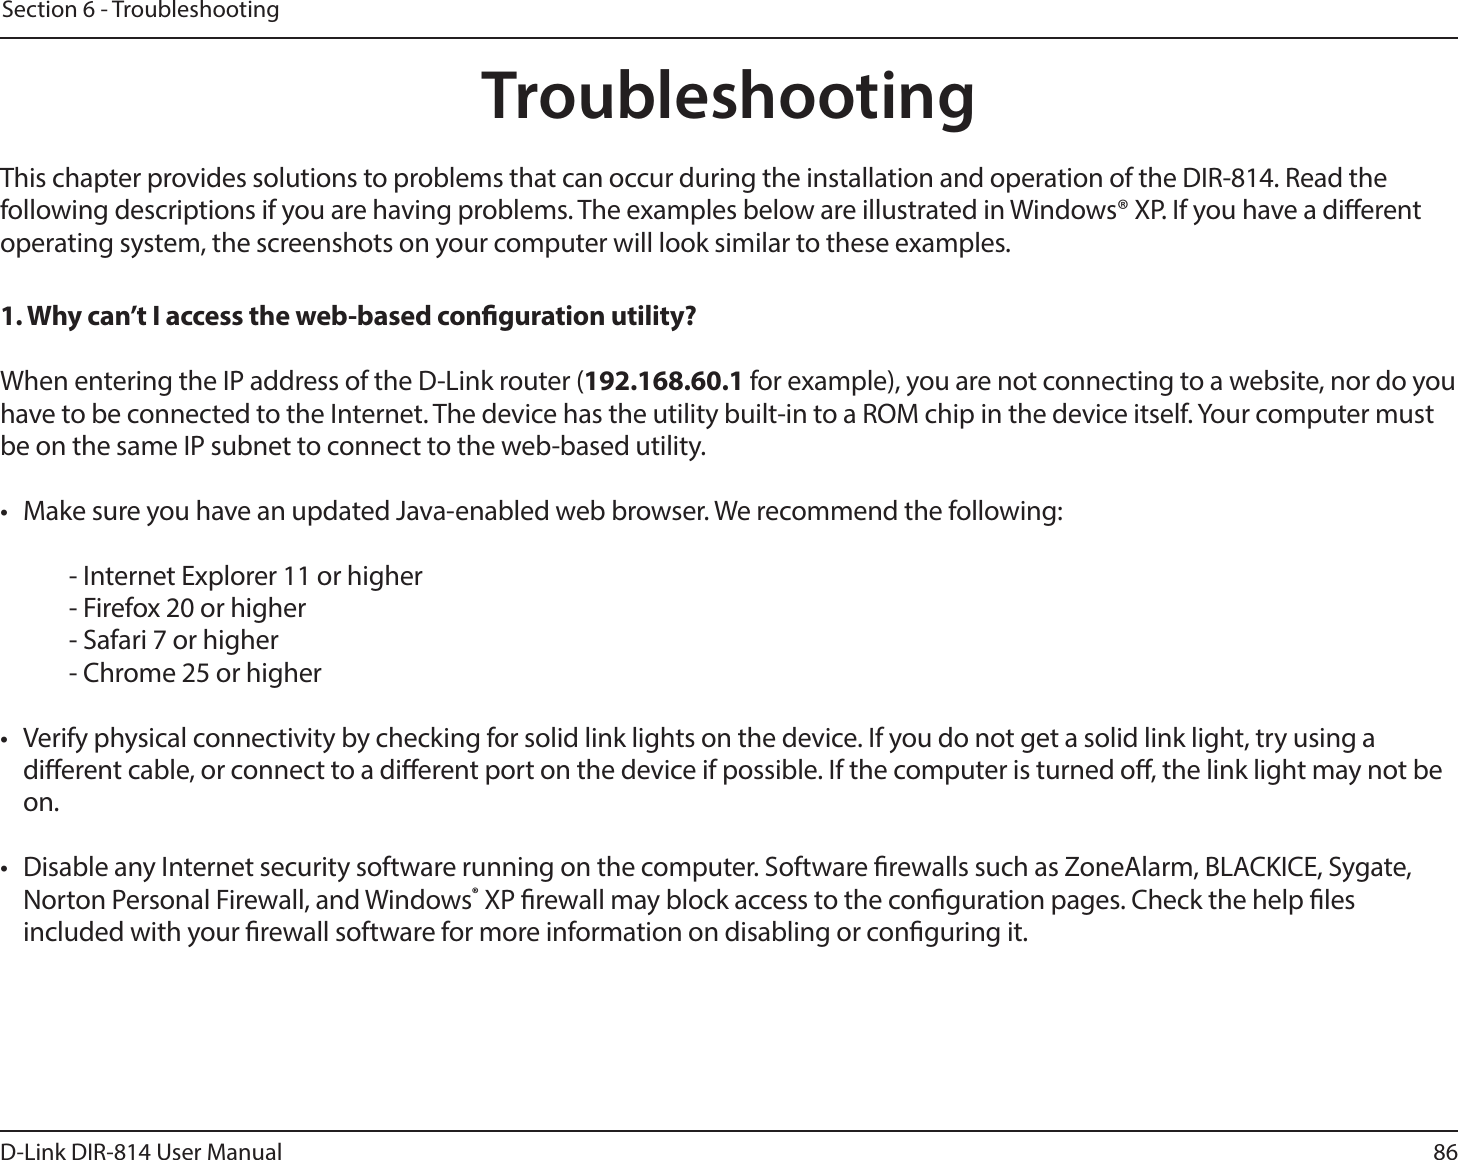 86D-Link DIR-814 User ManualSection 6 - TroubleshootingTroubleshootingThis chapter provides solutions to problems that can occur during the installation and operation of the DIR-814. Read the following descriptions if you are having problems. The examples below are illustrated in Windows® XP. If you have a dierent operating system, the screenshots on your computer will look similar to these examples.1. Why can’t I access the web-based conguration utility?When entering the IP address of the D-Link router (192.168.60.1 for example), you are not connecting to a website, nor do you have to be connected to the Internet. The device has the utility built-in to a ROM chip in the device itself. Your computer must be on the same IP subnet to connect to the web-based utility. •  Make sure you have an updated Java-enabled web browser. We recommend the following:  - Internet Explorer 11 or higher- Firefox 20 or higher- Safari 7 or higher- Chrome 25 or higher•  Verify physical connectivity by checking for solid link lights on the device. If you do not get a solid link light, try using a dierent cable, or connect to a dierent port on the device if possible. If the computer is turned o, the link light may not be on.•  Disable any Internet security software running on the computer. Software rewalls such as ZoneAlarm, BLACKICE, Sygate, Norton Personal Firewall, and Windows® XP rewall may block access to the conguration pages. Check the help les included with your rewall software for more information on disabling or conguring it.